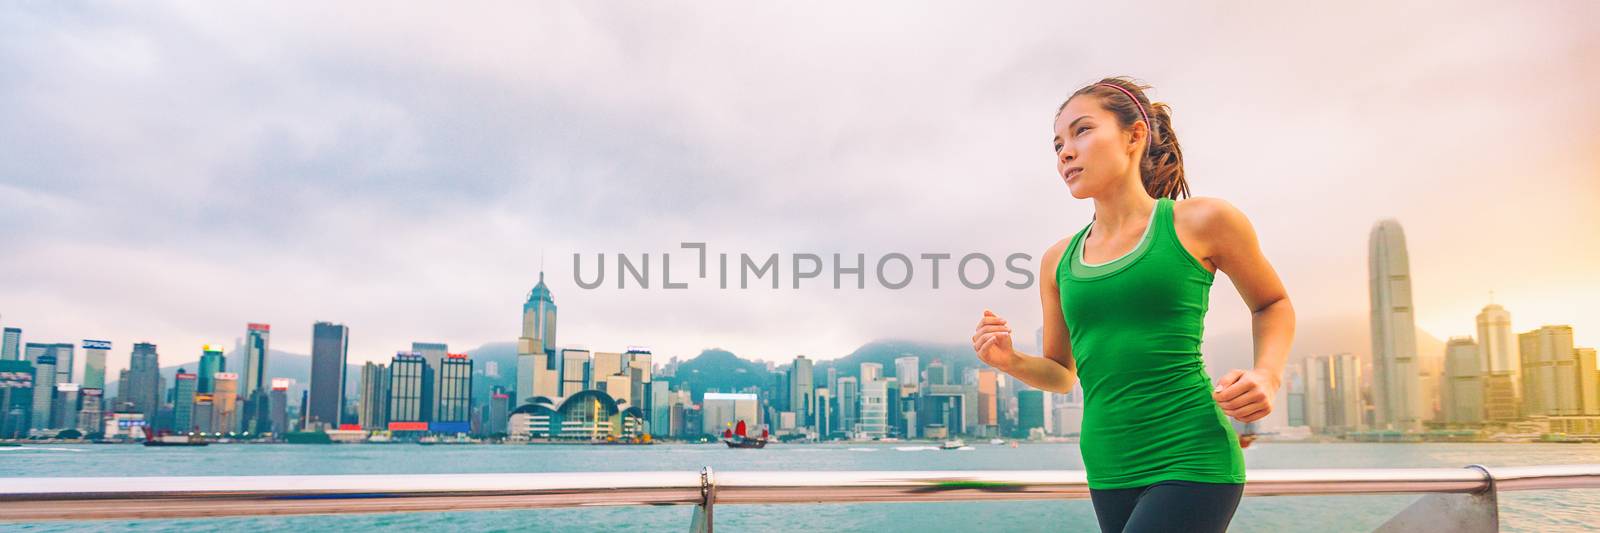 Hong Kong city China travel sightseeing fitness woman jogging at skyline banner panorama . Healthy active lifestyle panoramic view of urban landscape.